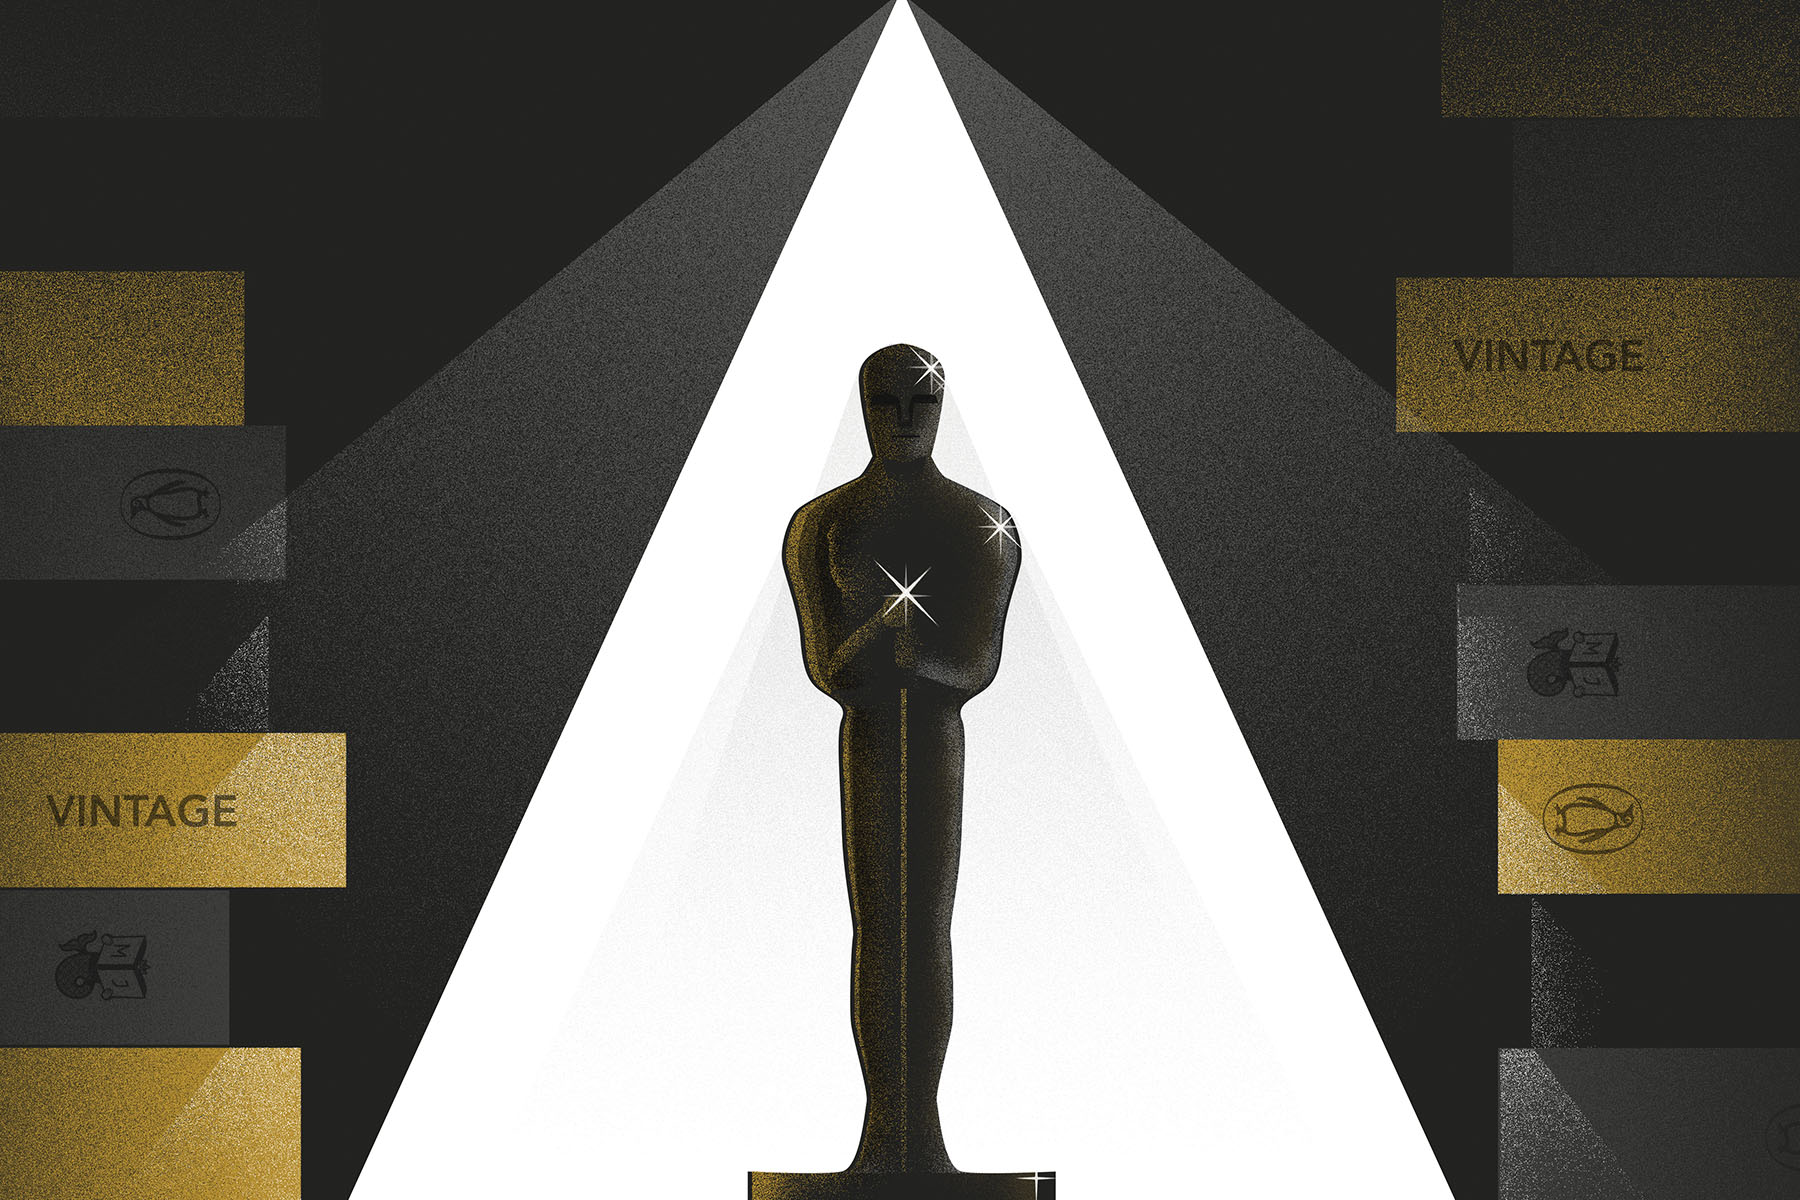 An illustration of an Oscars statuette with penguin imprint names on gold category titles on either side.